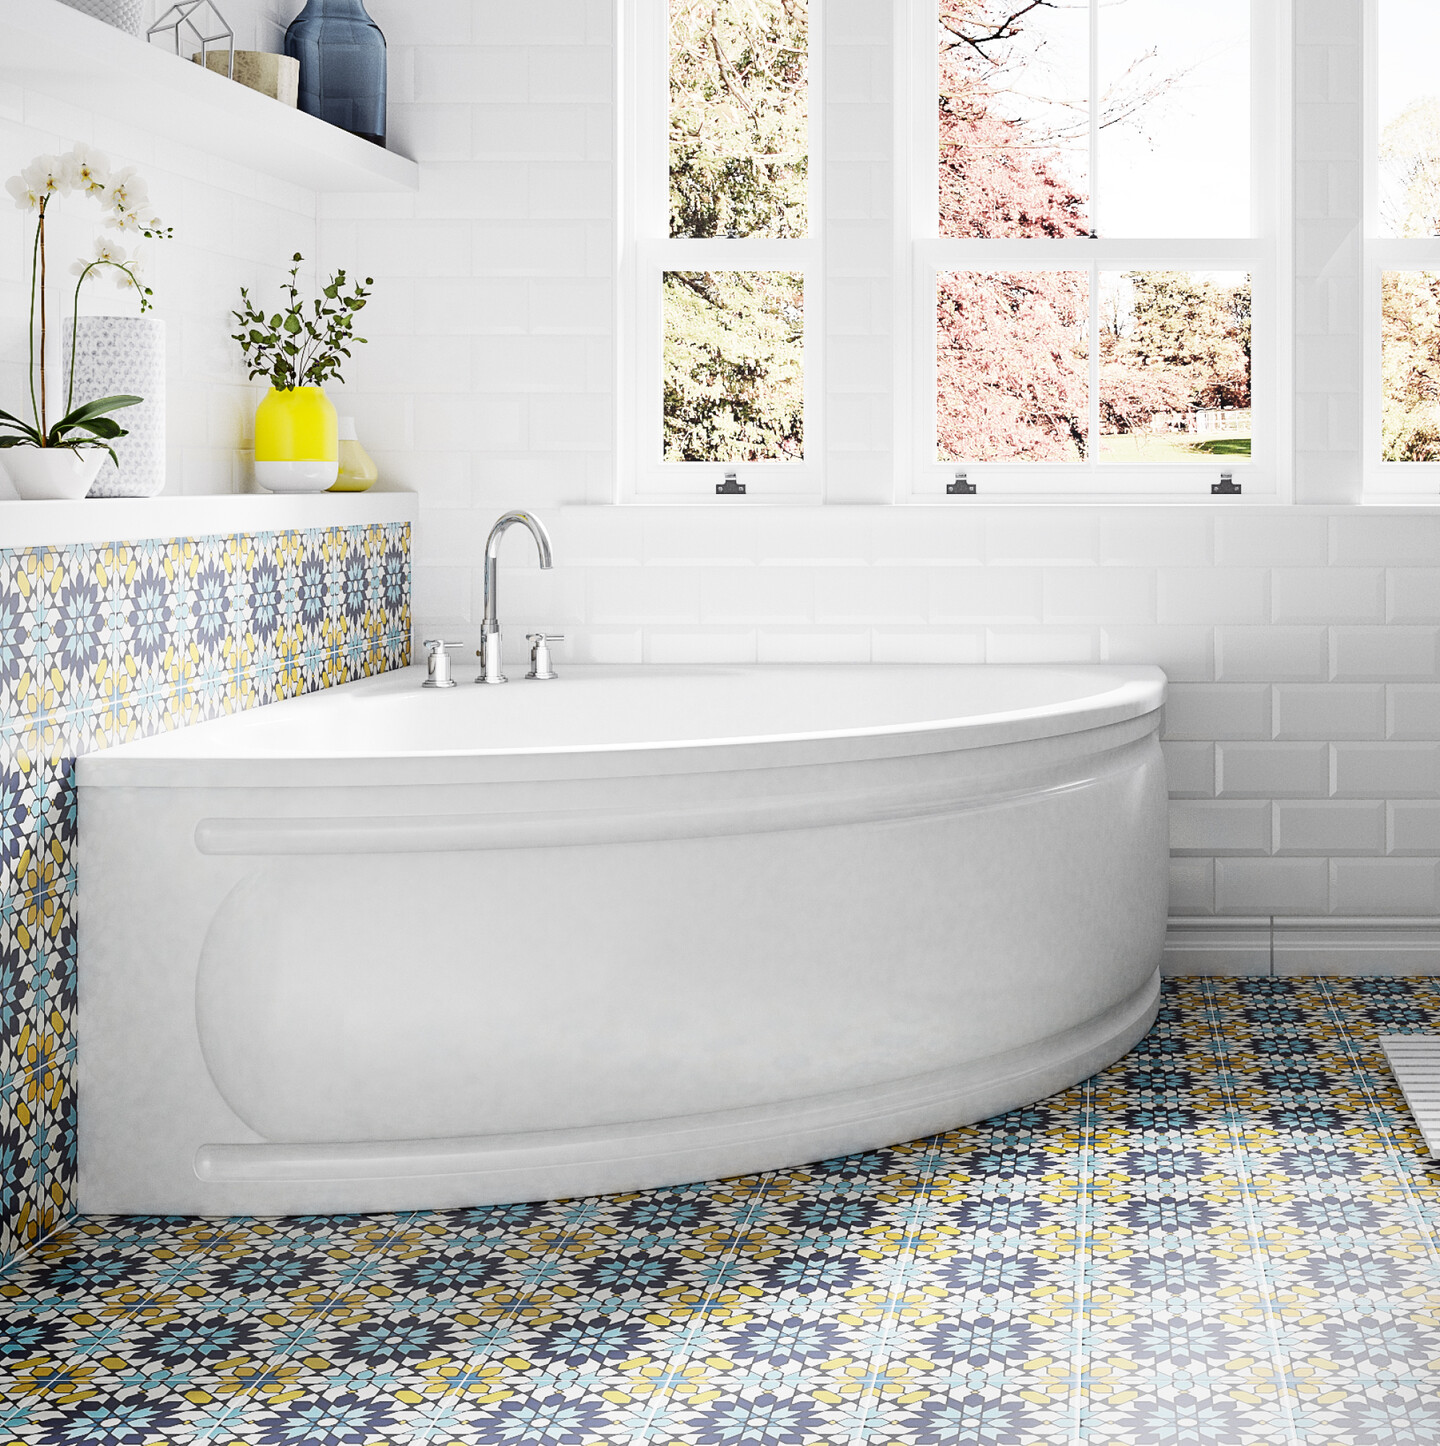 A photo of one of our Baths in a tiled bathroom